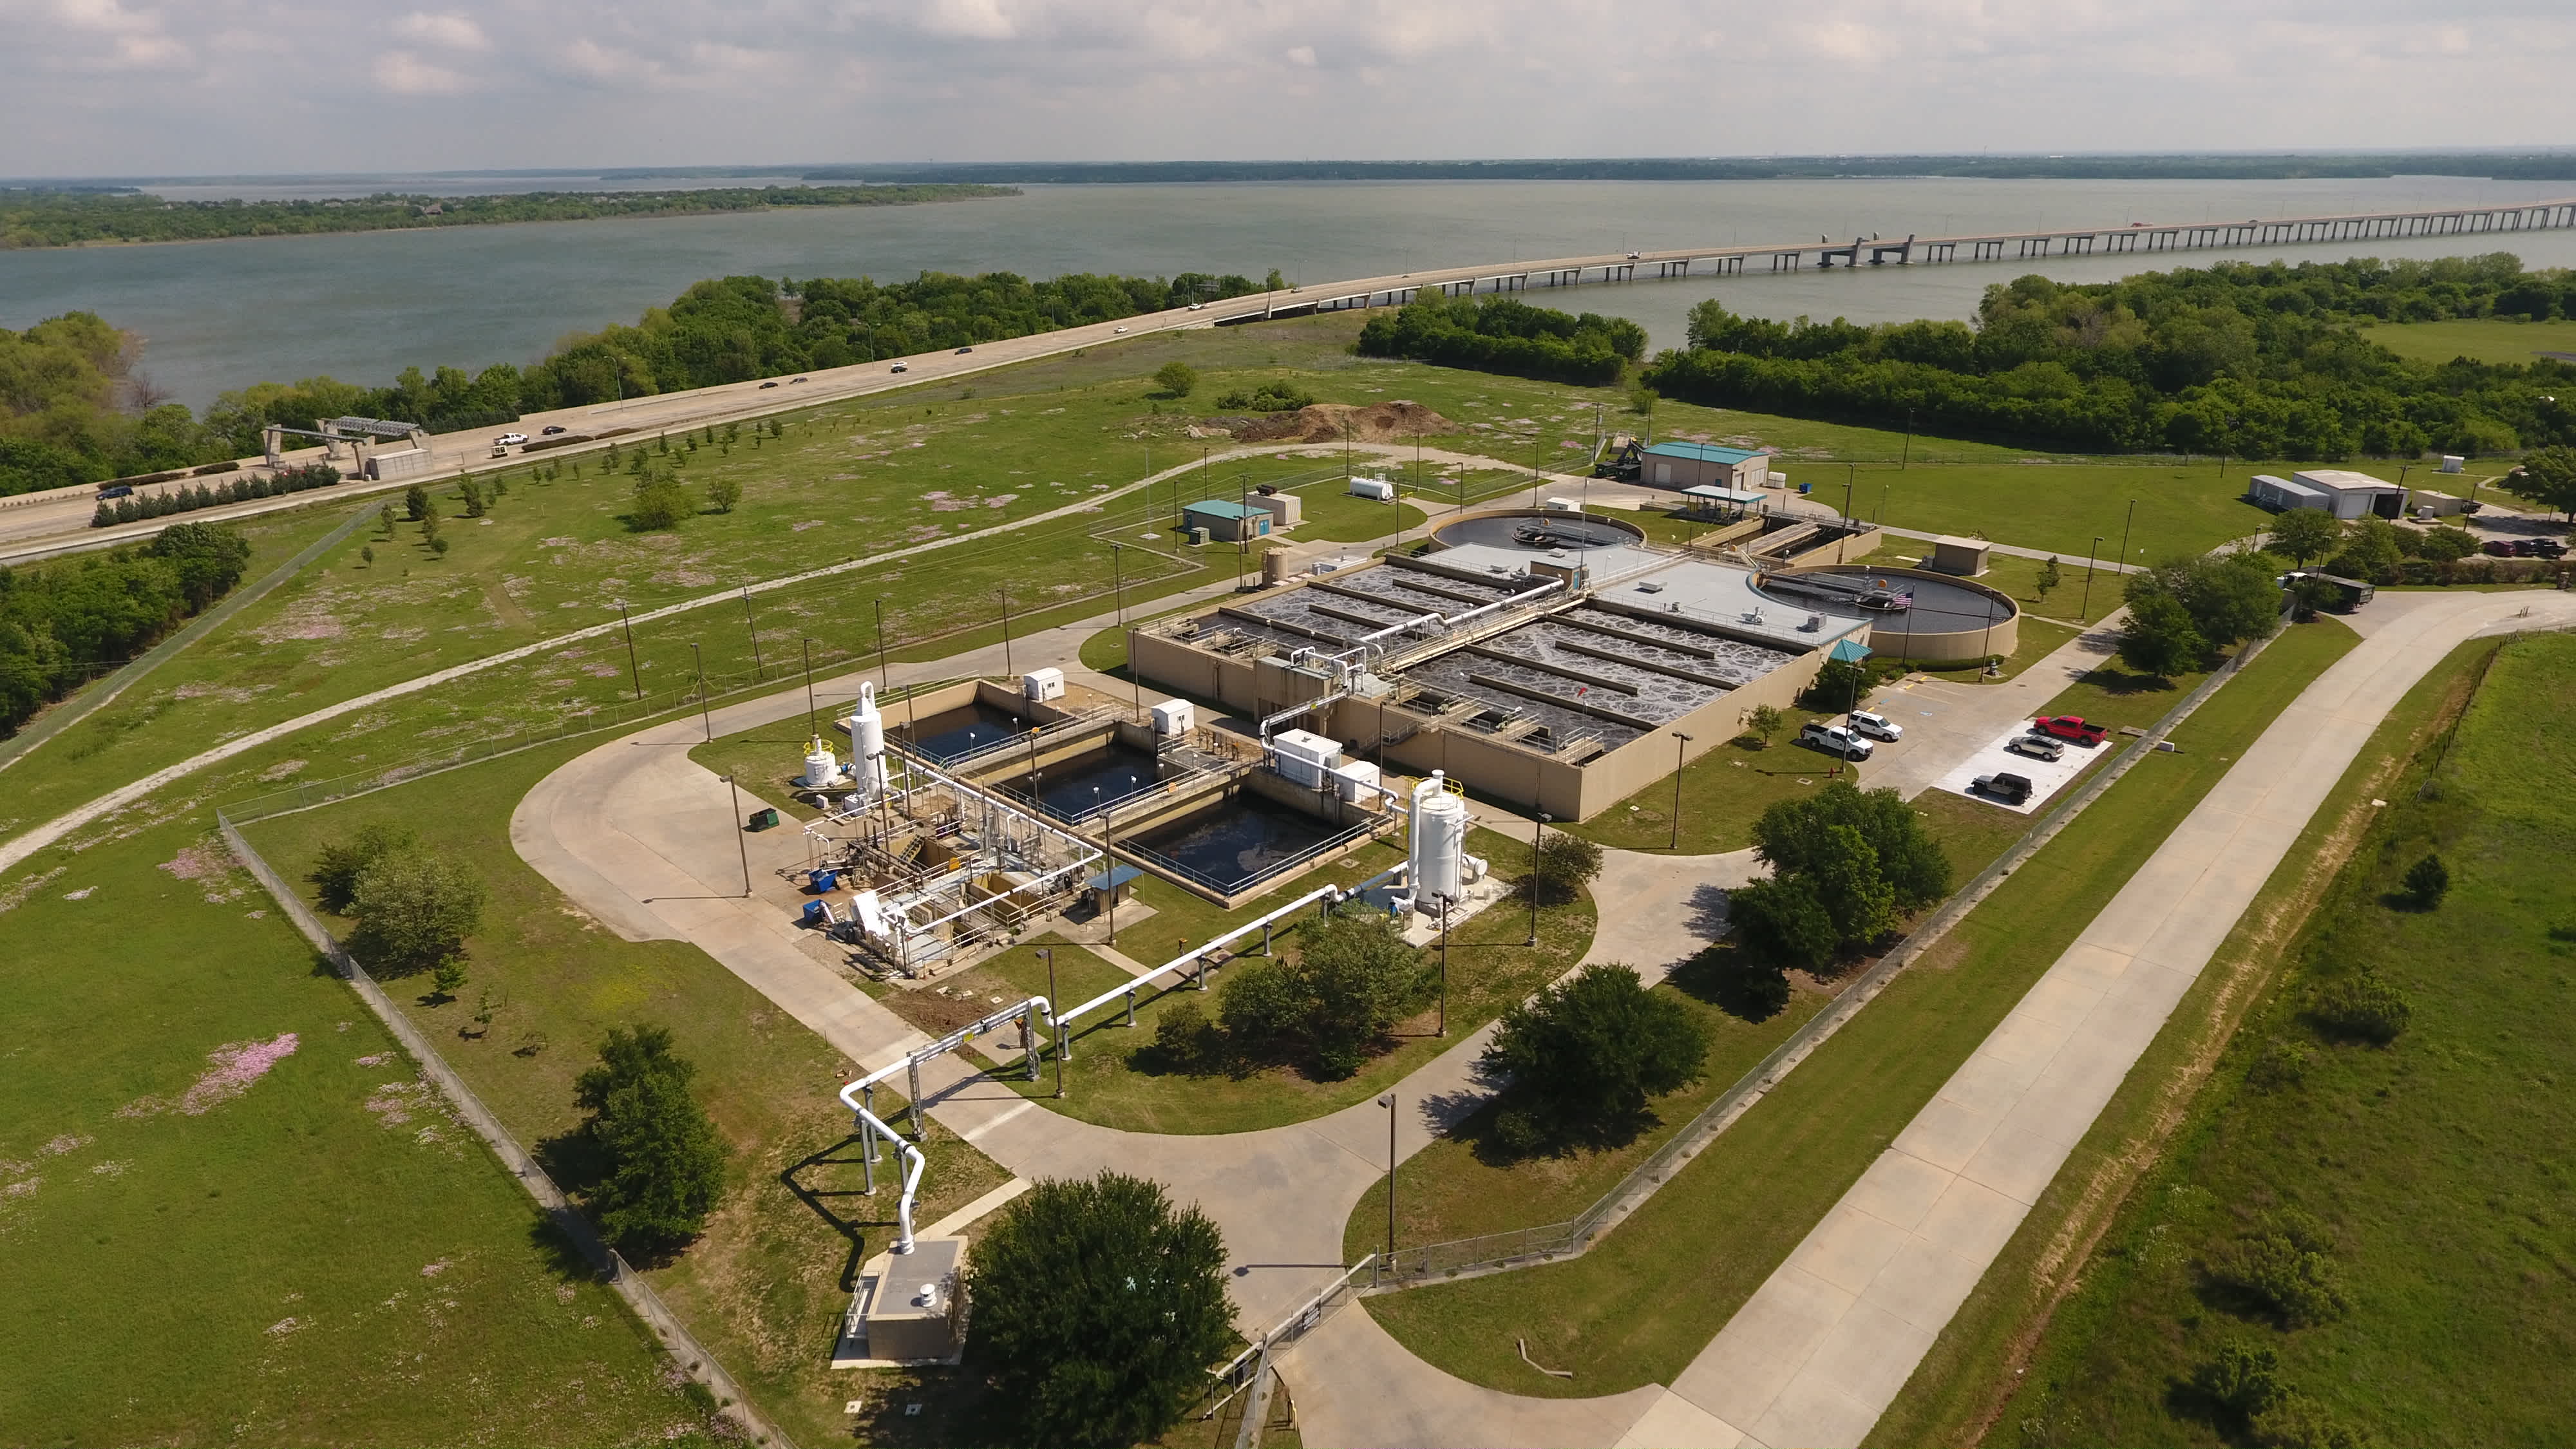 The Lakeview Regional Water Reclamation Plant will be expanded from 5.5 MGD to 7.5 MGD.